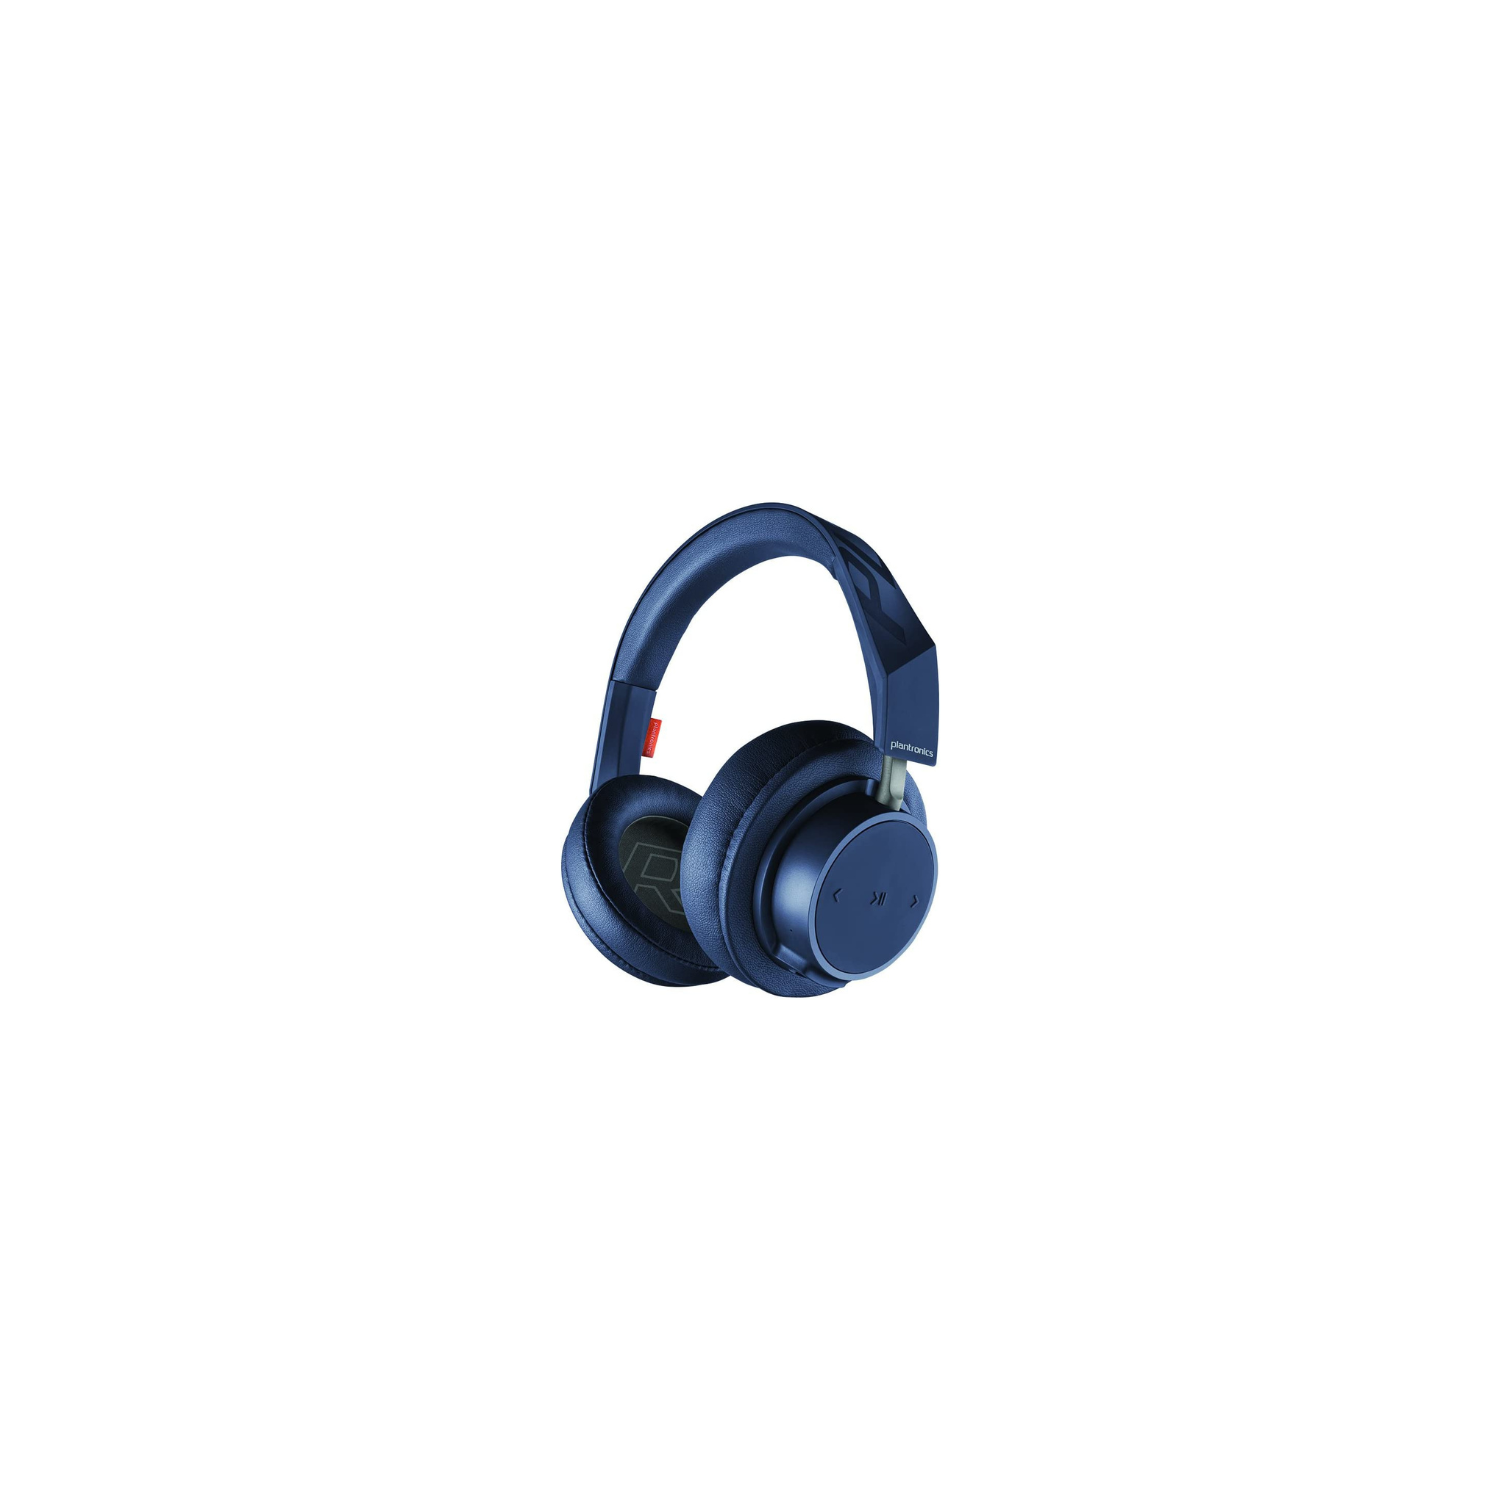 Plantronics BackBeat GO 600 Over-the-Ear Bluetooth Headphones with Noise Isolation and 18 Hours Battery Life (21113803) - Navy